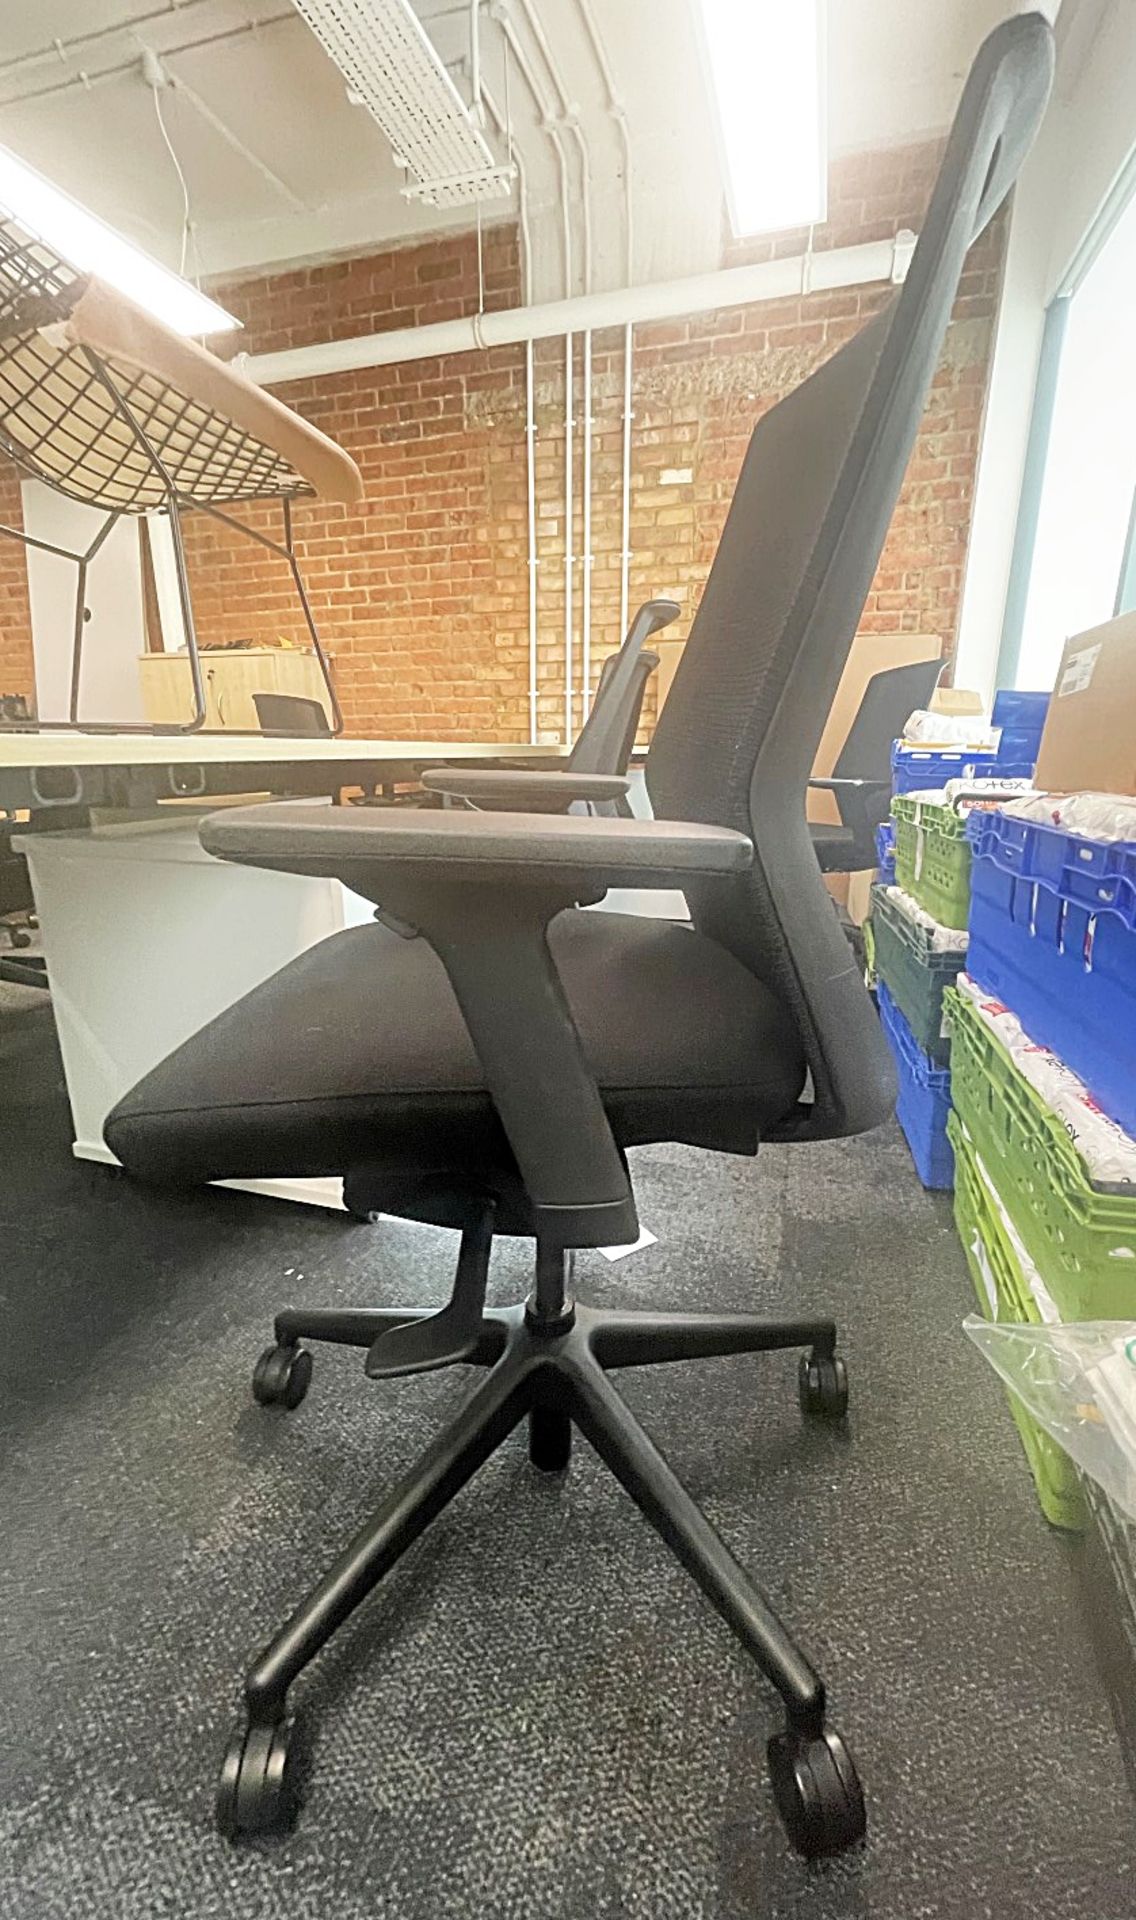 10 x BESTUHL J1 Ergonomic Office Chairs - To Be Removed From An Executive Office Environment - - Image 6 of 15